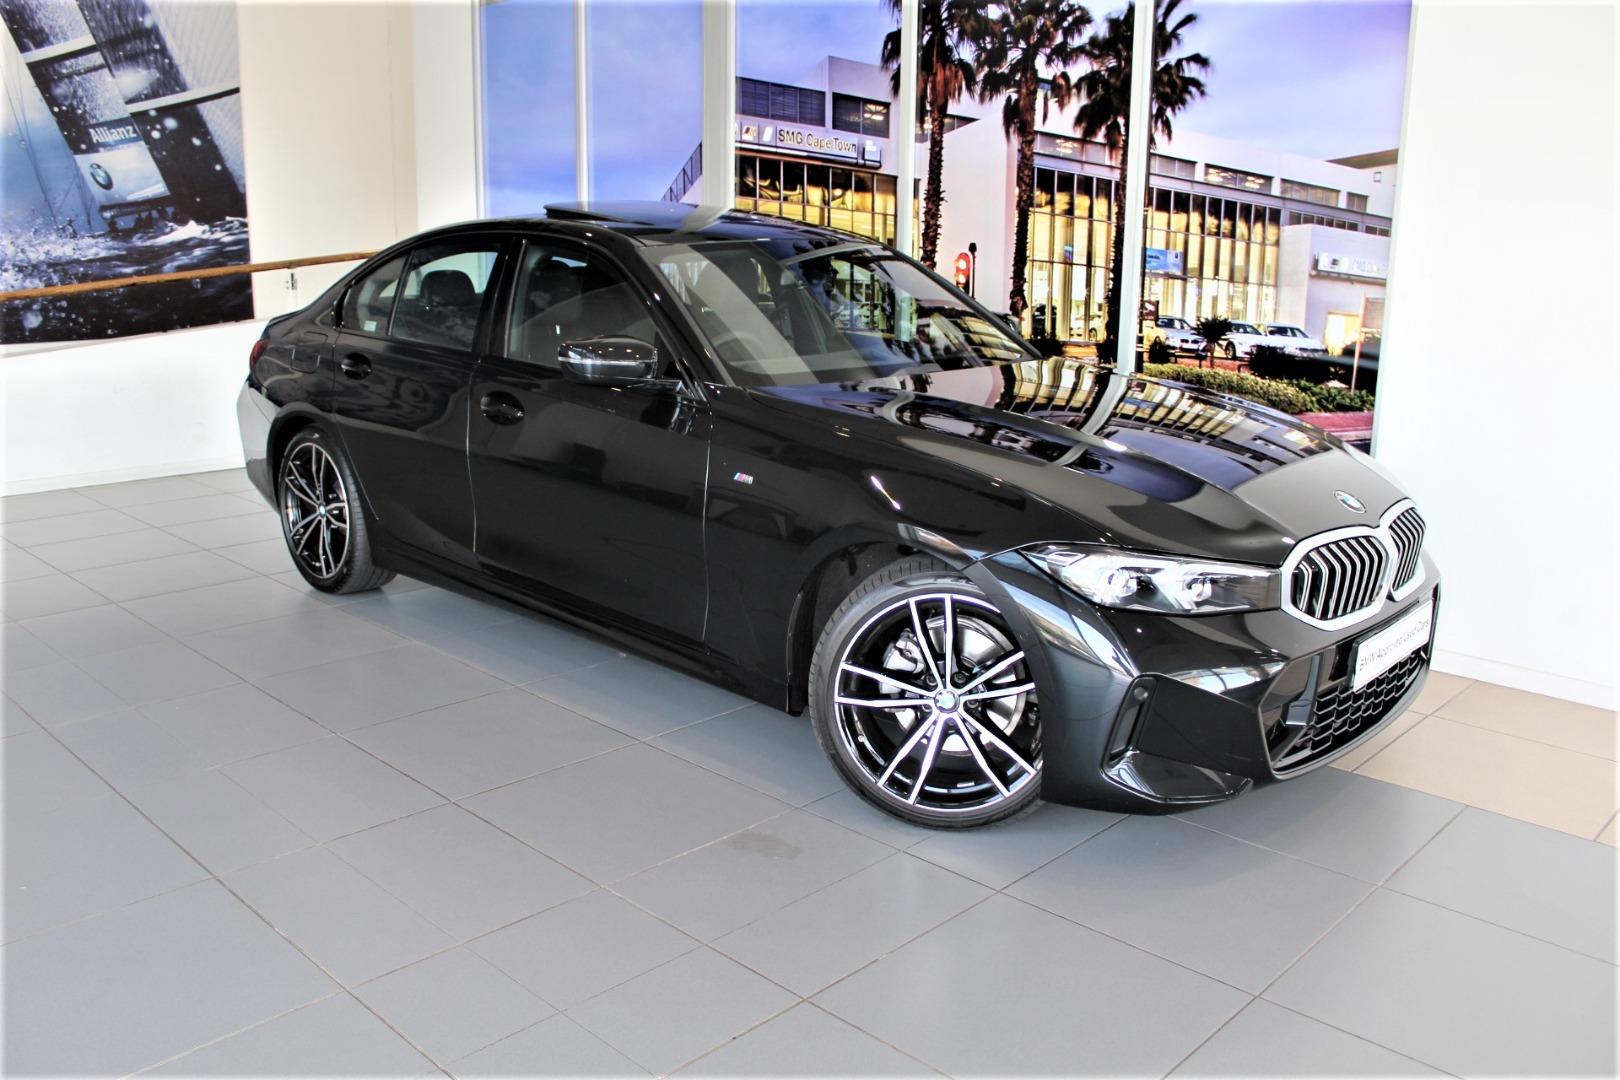 2023 BMW  320i M SPORT AT (G20) (LCI)  for sale - SMG12|USED|115392